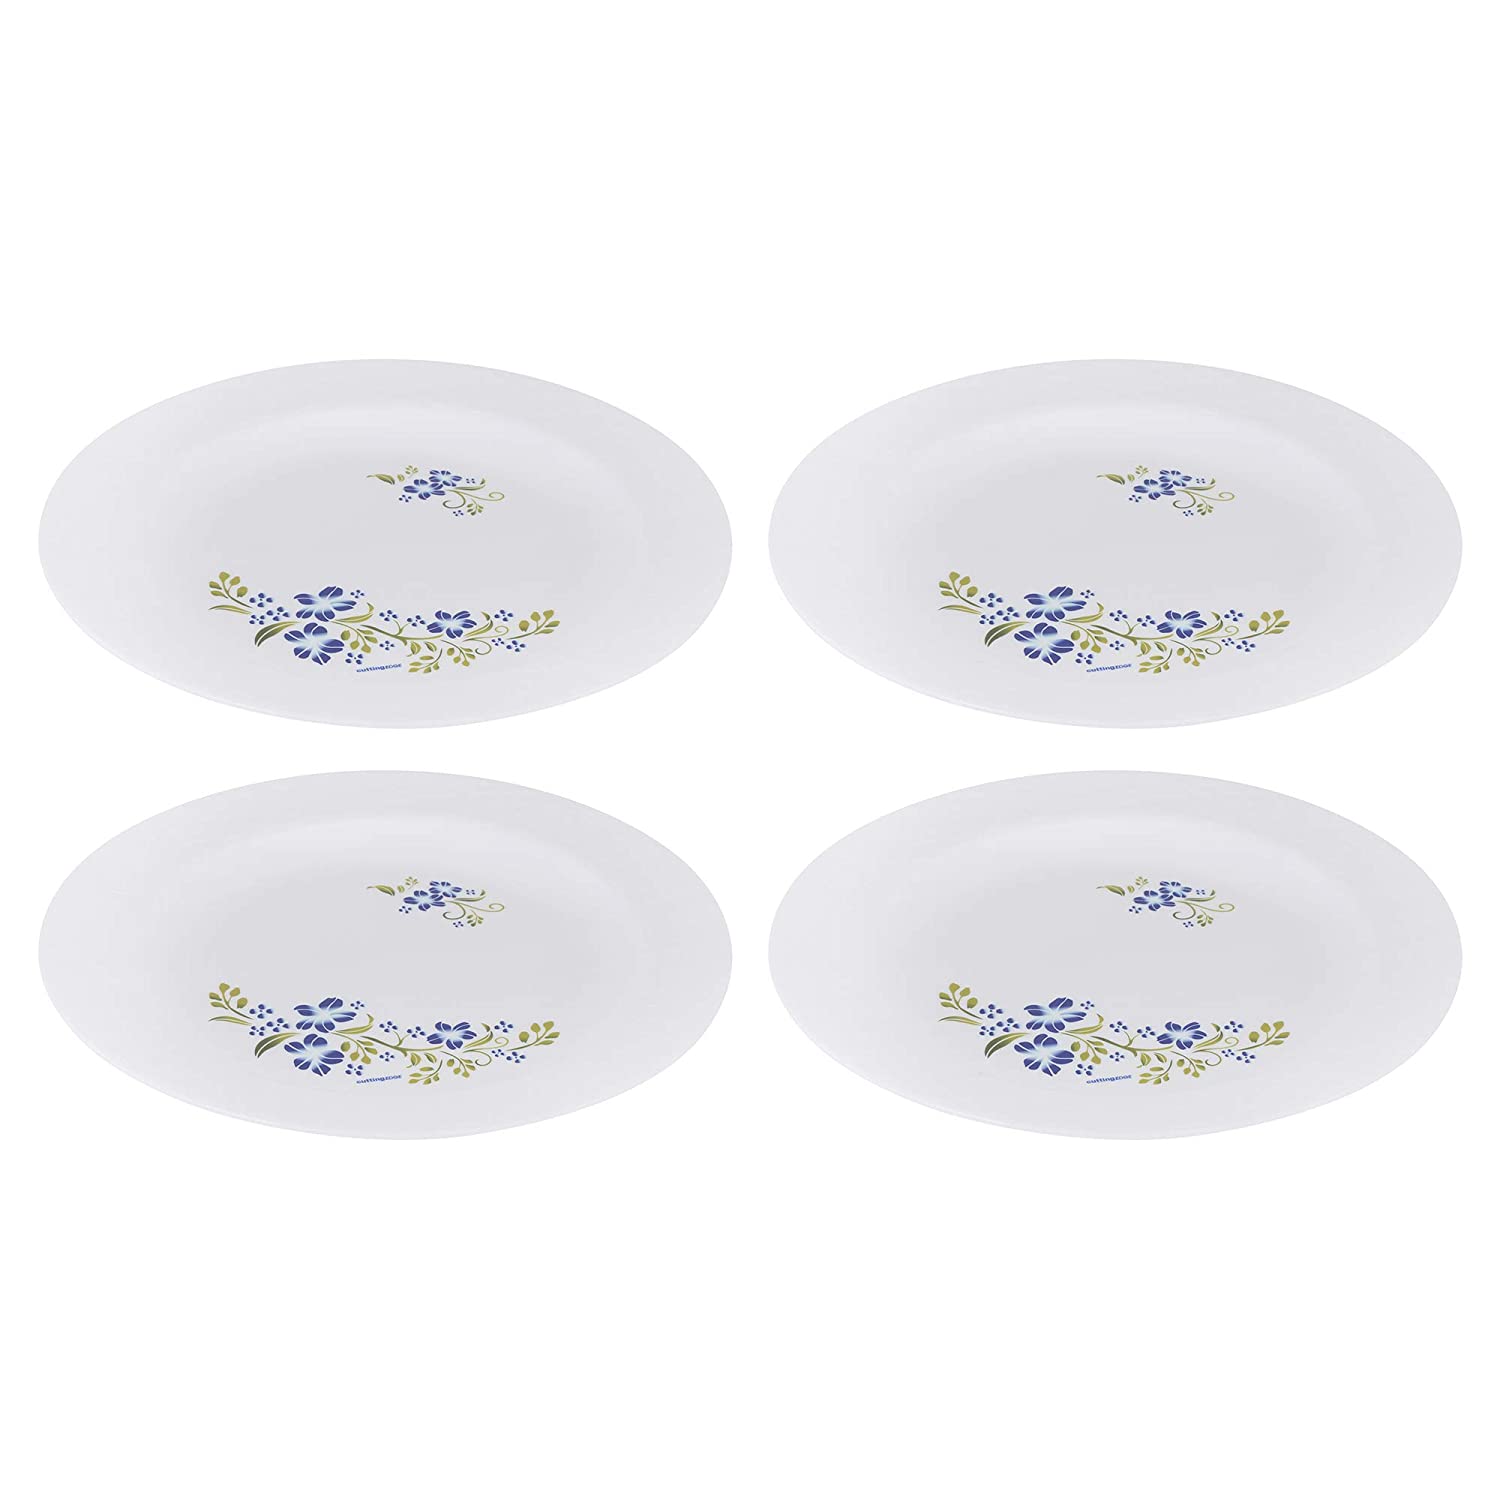 Cutting EDGE Round Colorful Set of Dinner Plates with Floral Printed Design for Families, Parties, Unbreakable, Kid Friendly, Microwave Safe, Dishwasher Safe